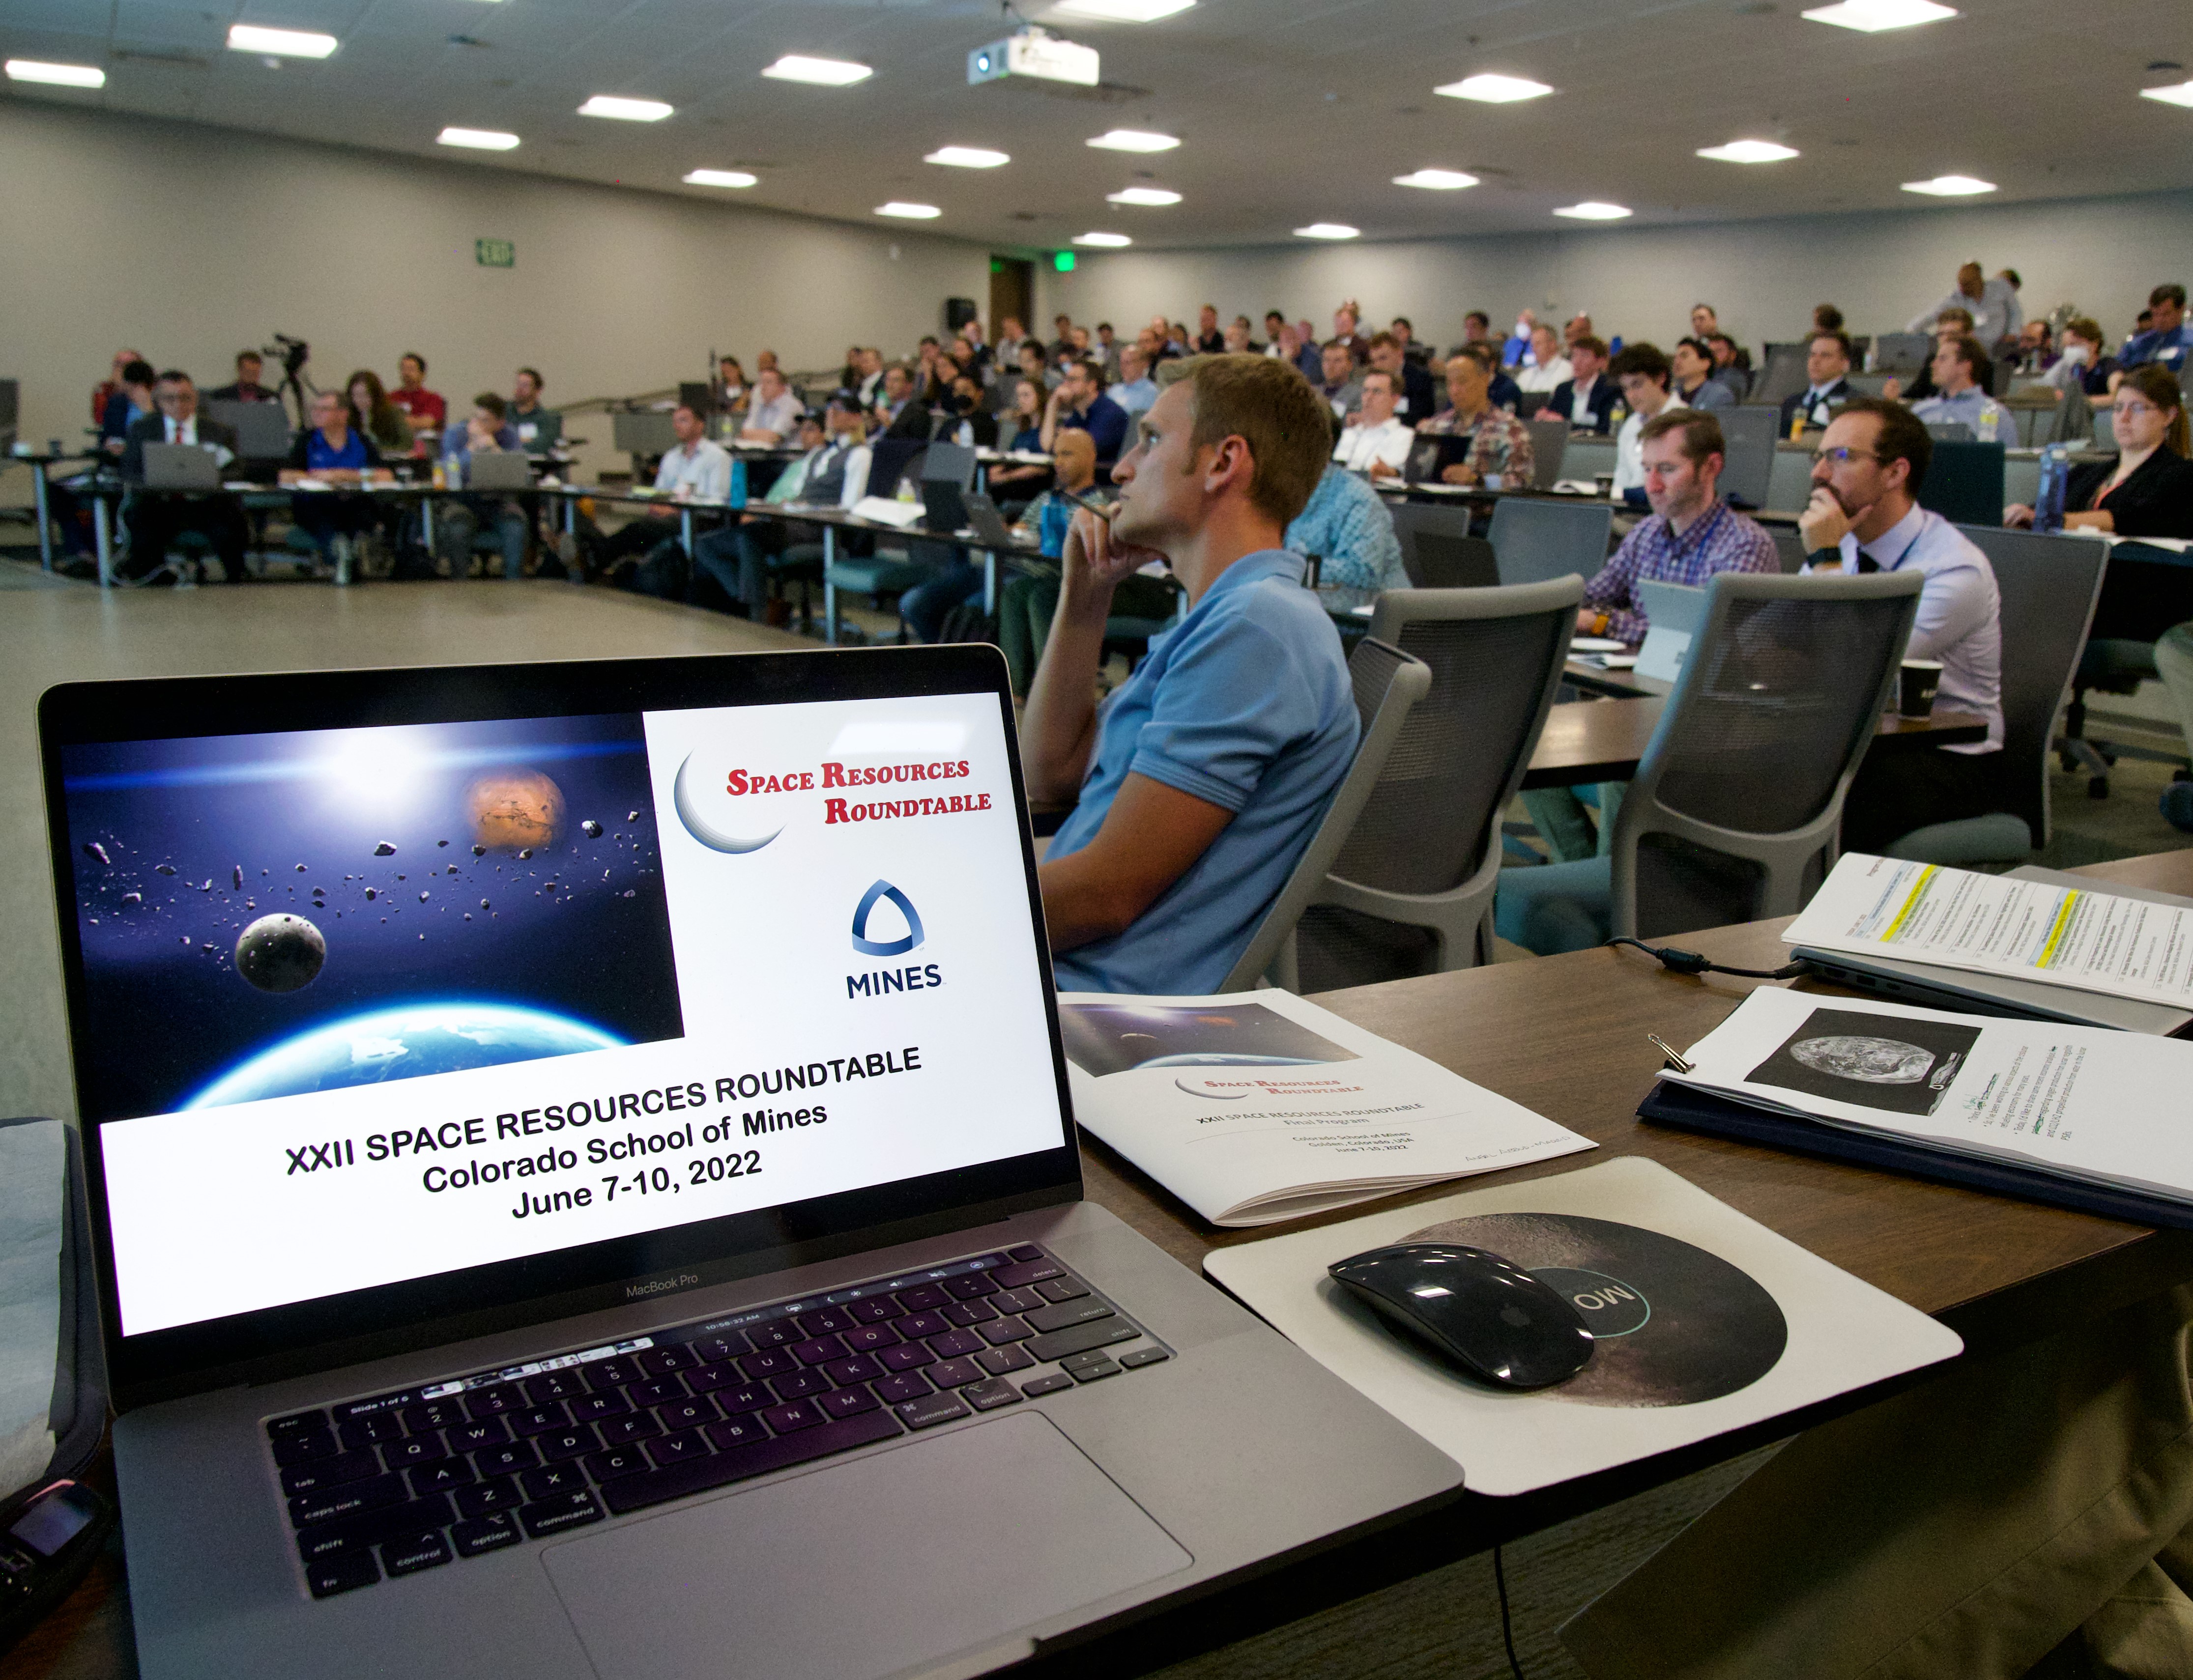 Scientists, engineers, entrepreneurs, mining and mineral industry experts, legal experts and policy makers gather together at the Colorado School of Mines to participate in the Space Resources Roundtable.